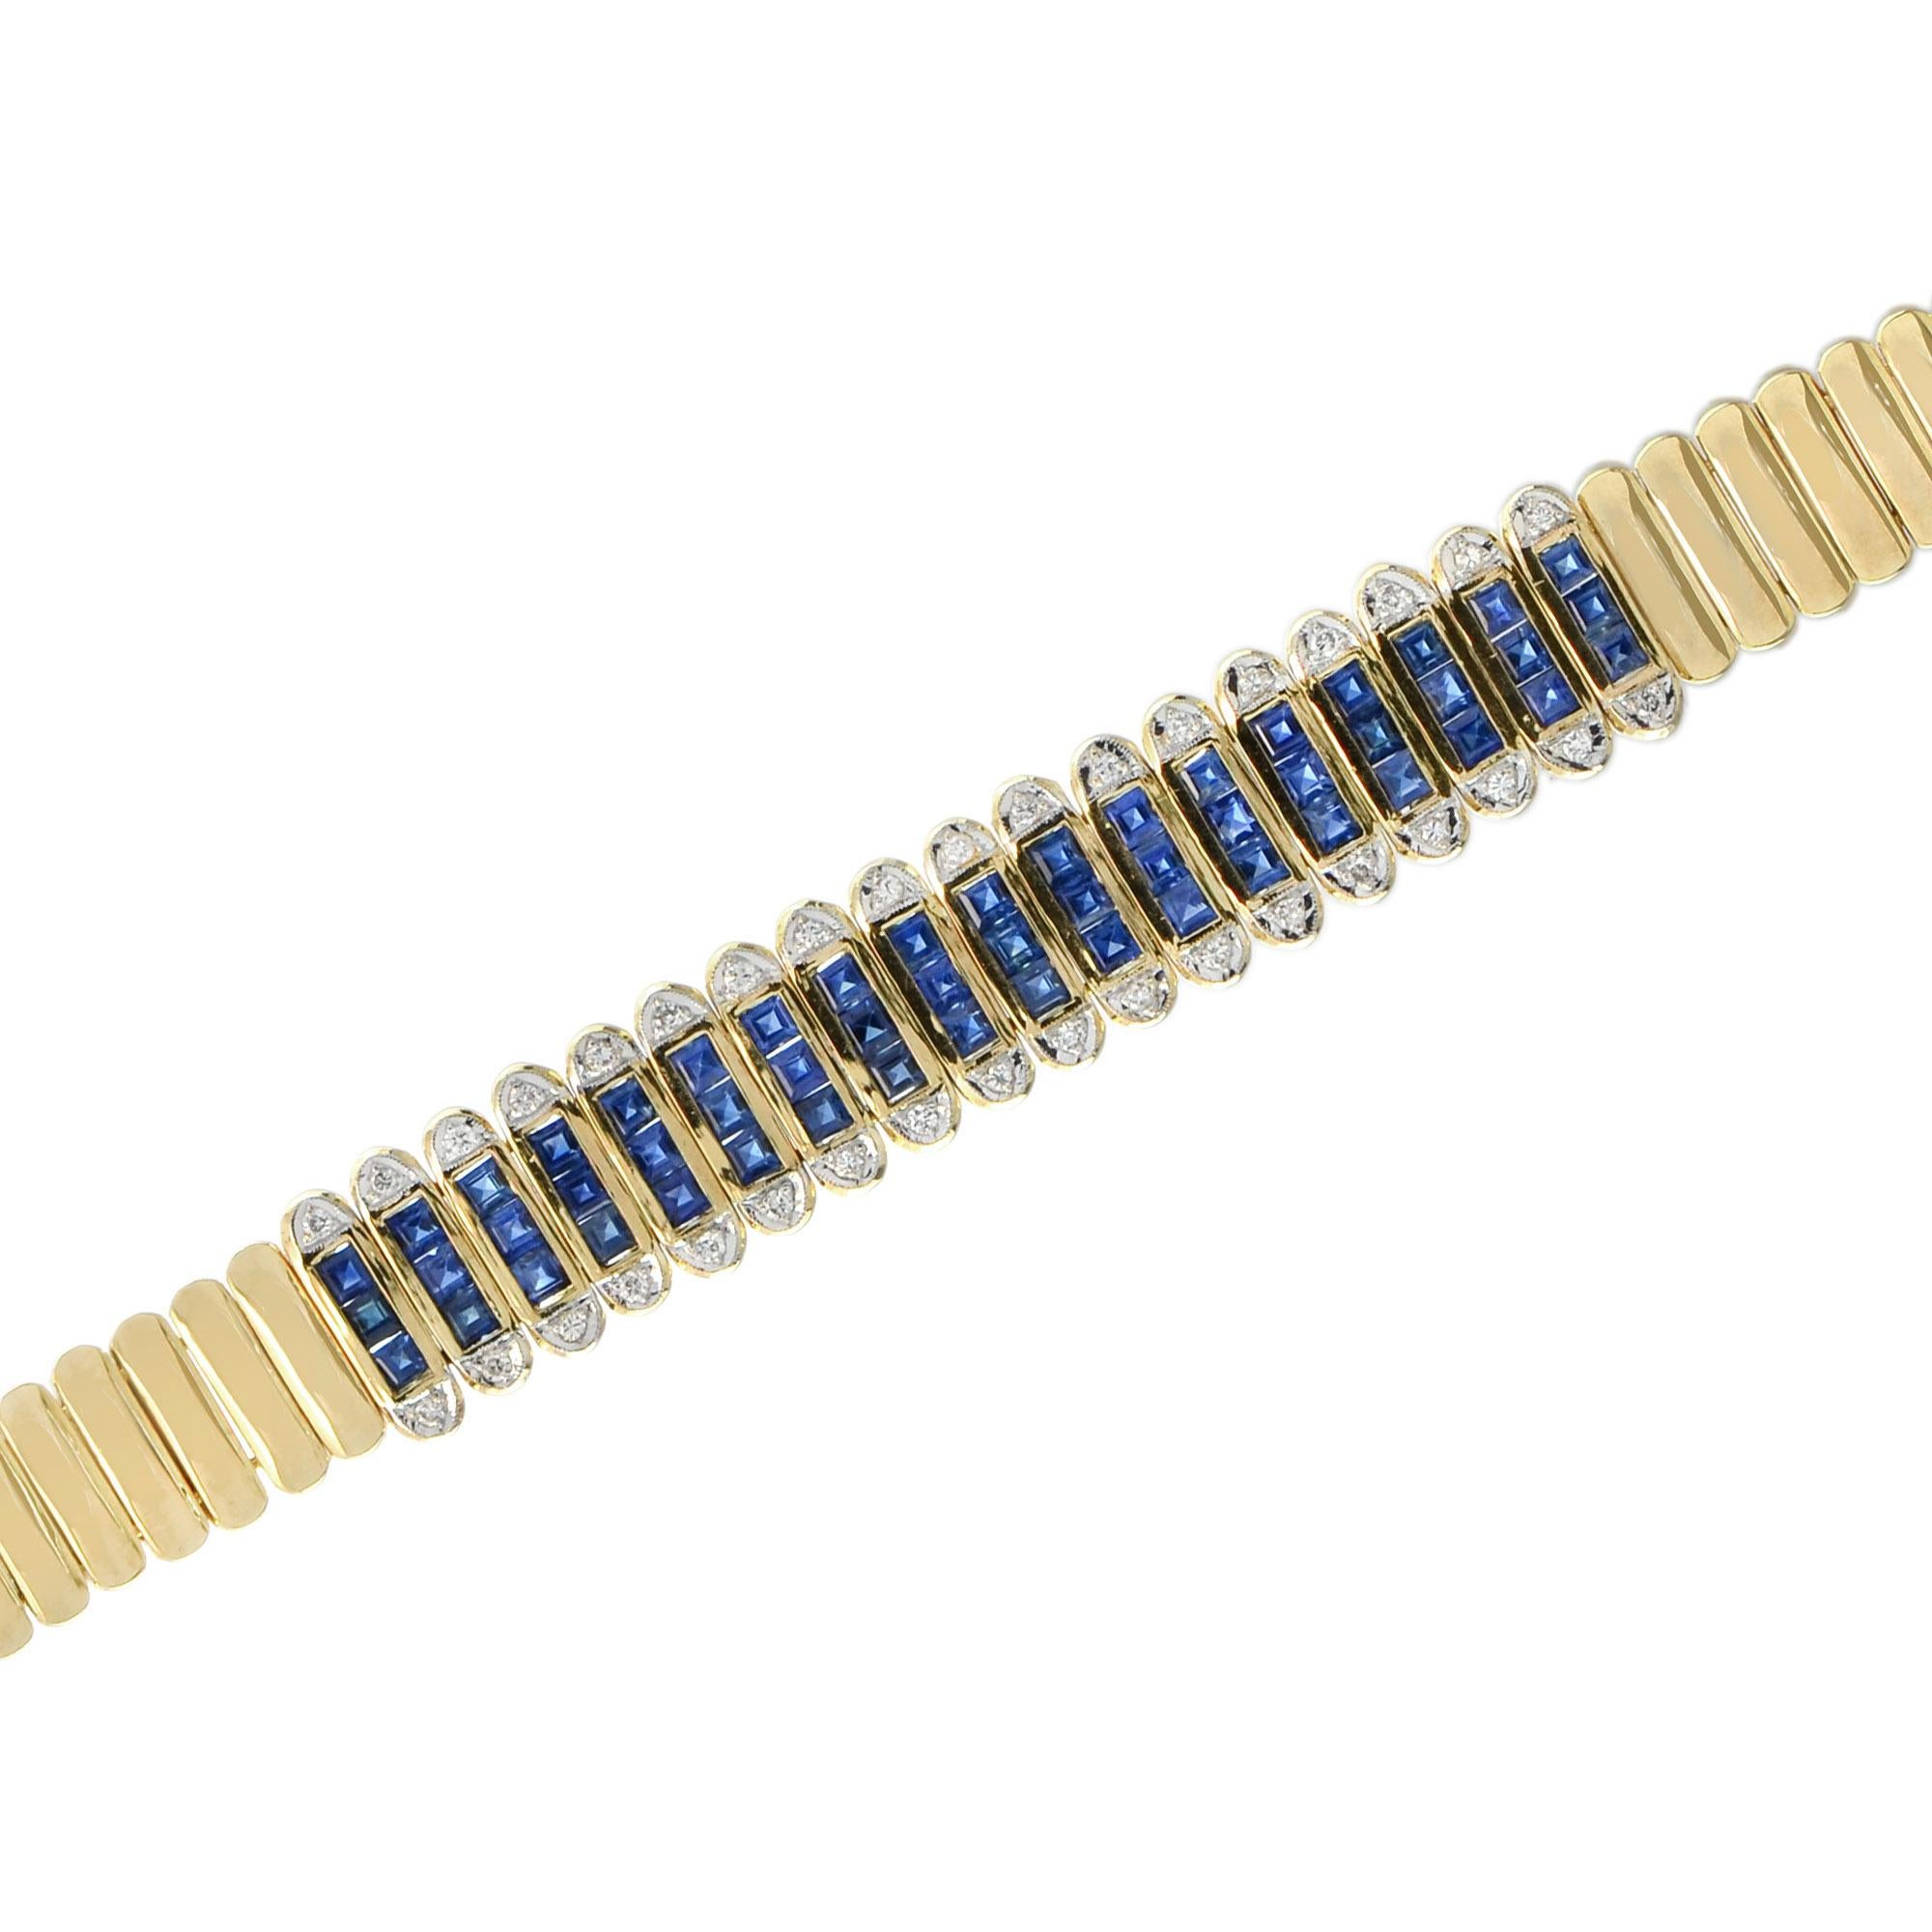 This elegant, Art Deco inspired bracelet is simply magnificent as it features 54 French cut blue sapphires and 36 diamonds in 18k yellow gold. Renowned for their allure and ranges of blues; sapphires are considered a symbol of love, loyalty, and